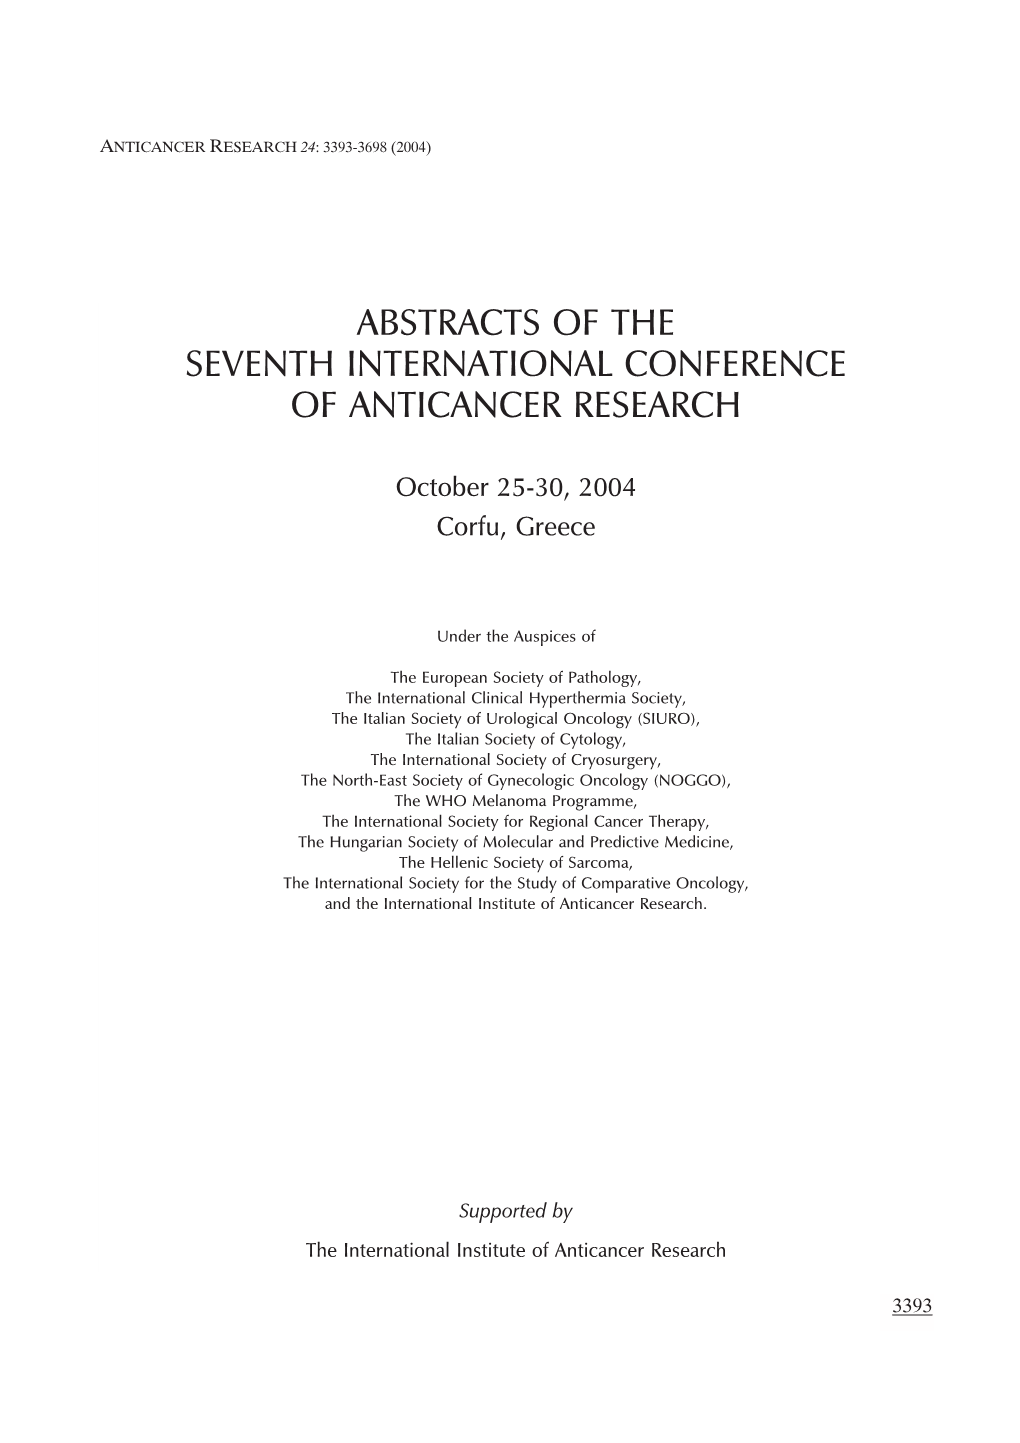 Abstracts of the Seventh International Conference of Anticancer Research